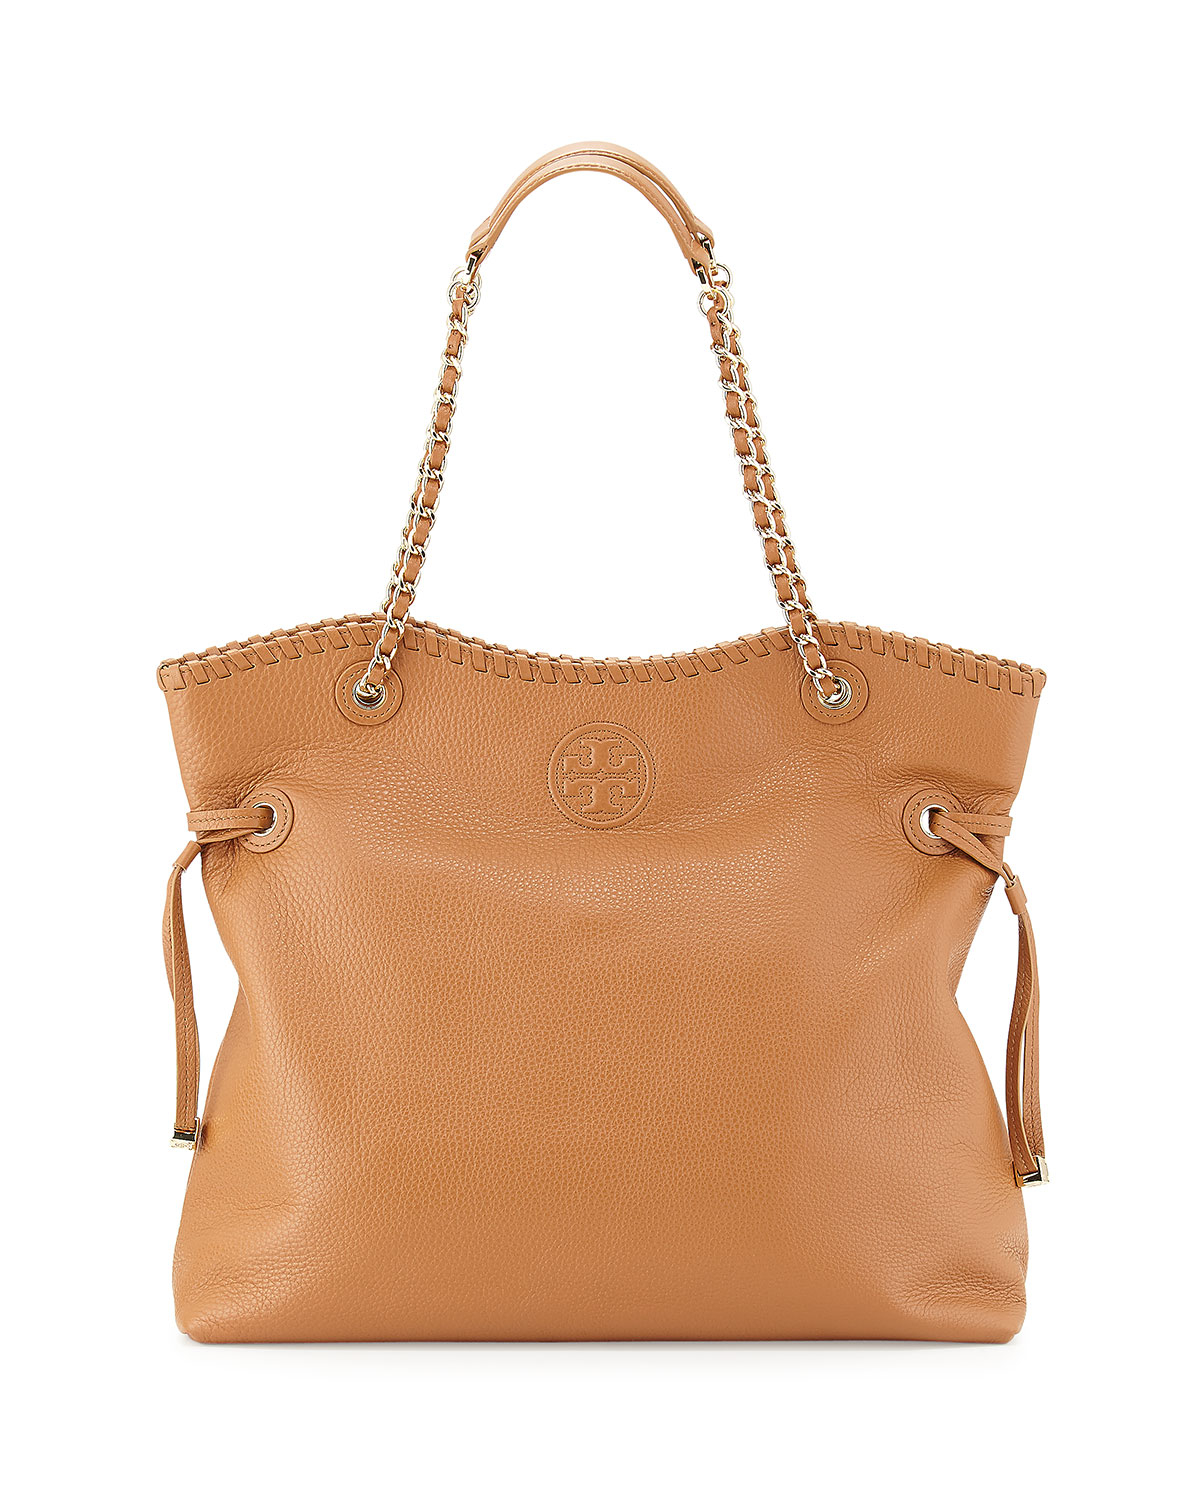 Tory Burch   Brown Marion Slouchy Tote Bag   Lyst